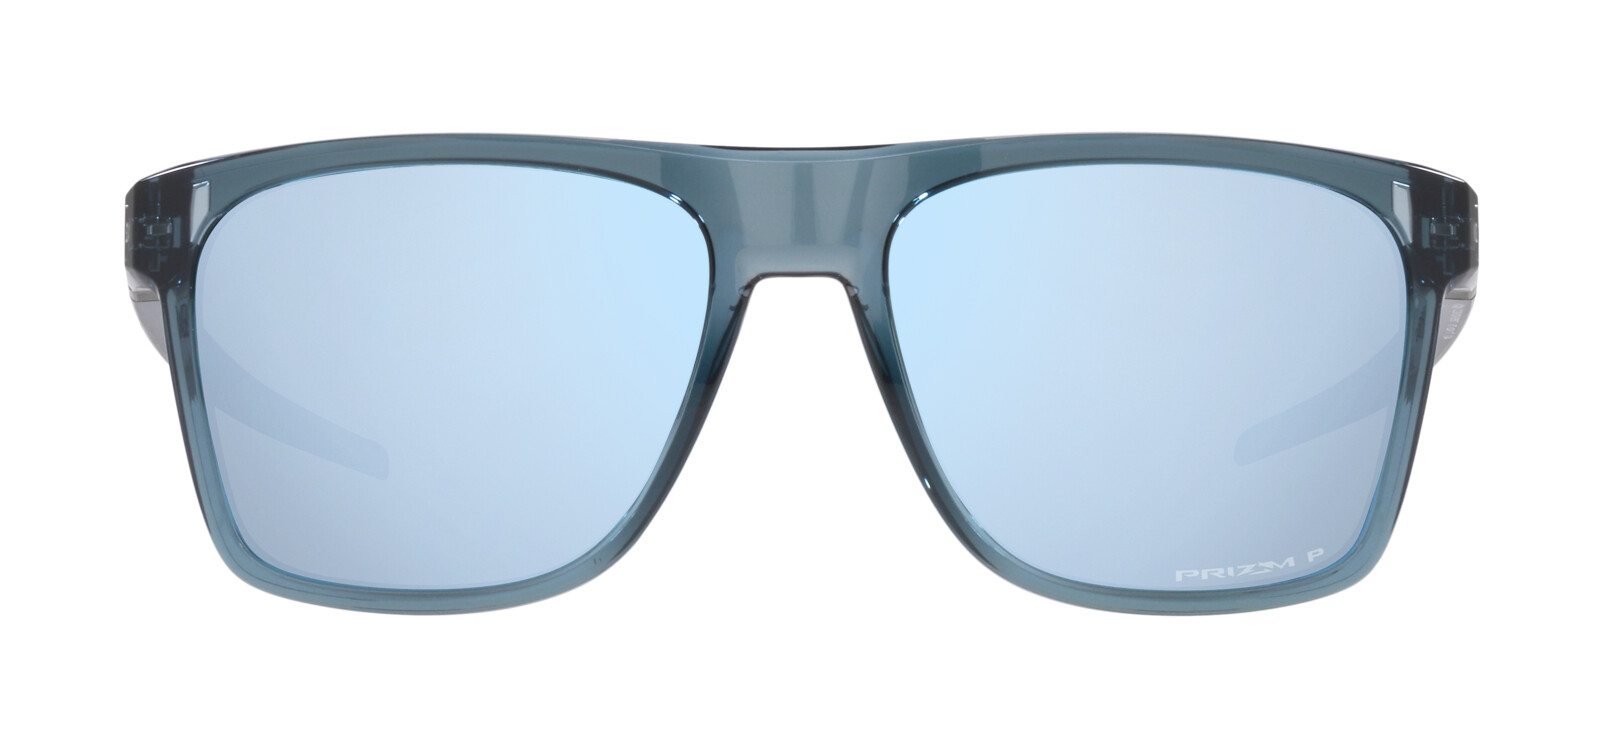 [products.image.front] Oakley LEFFINGWELL 0OO9100 910005 Sonnenbrille